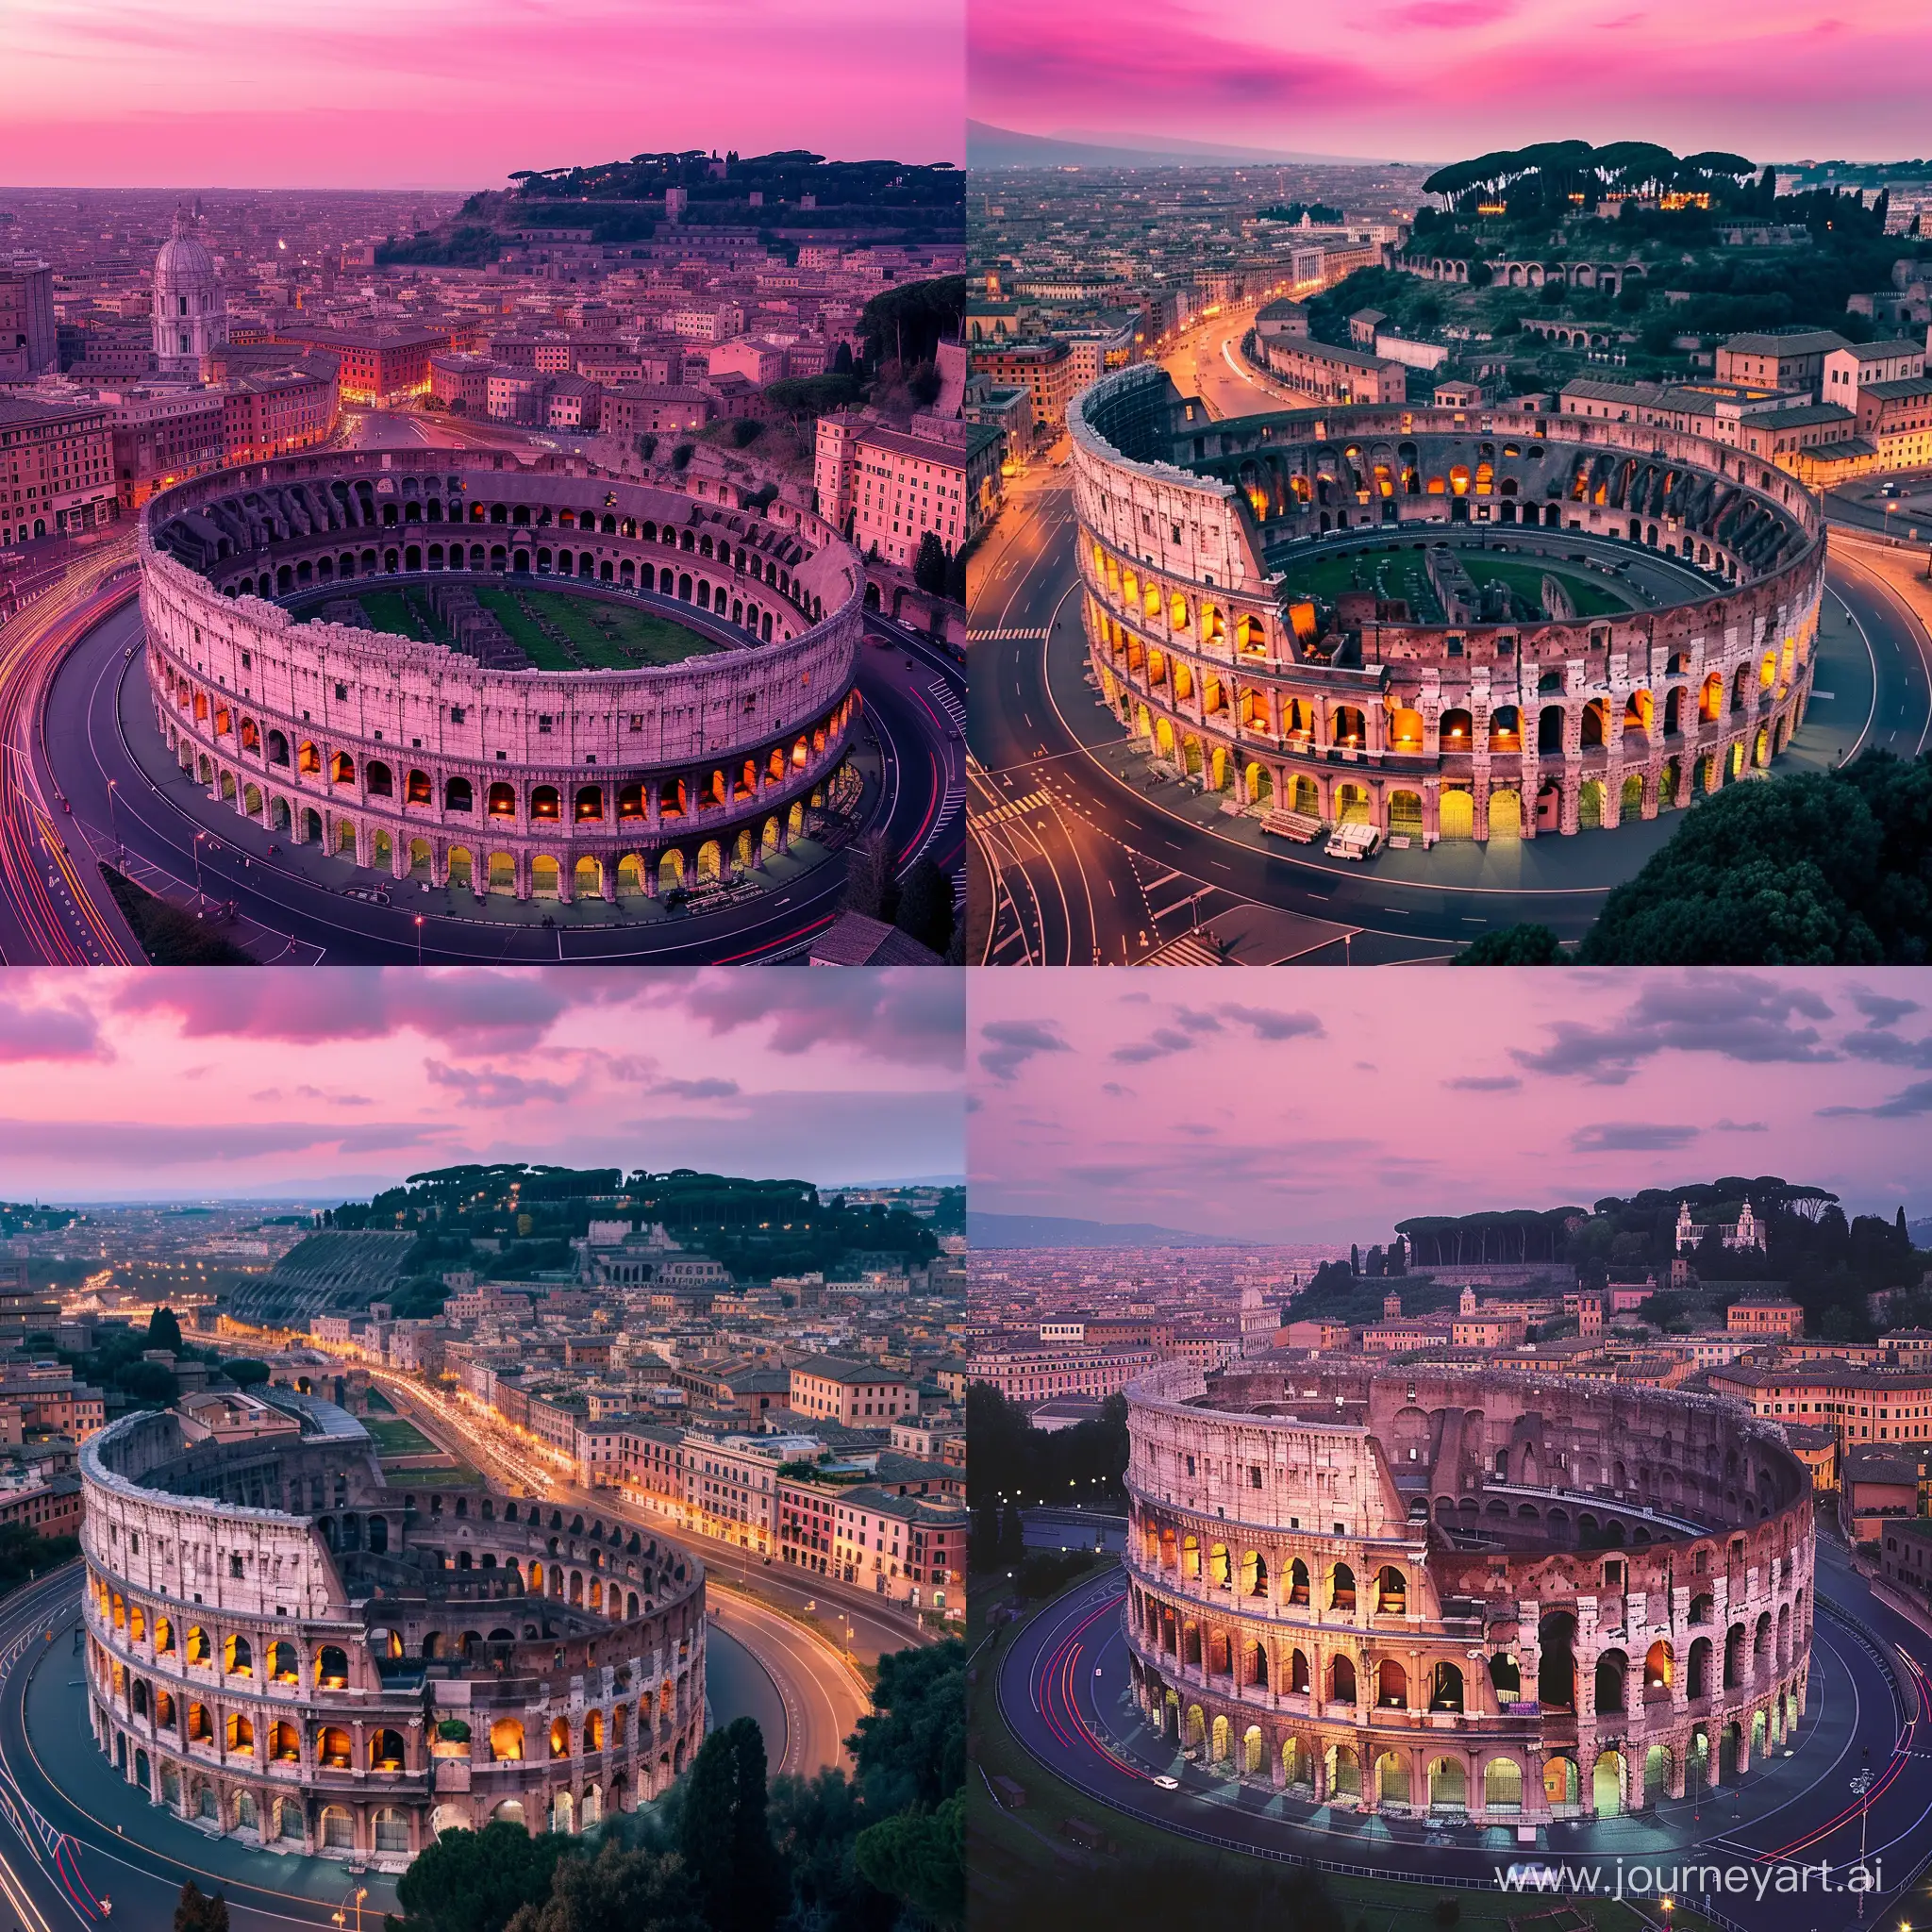 Picturesque-Sunset-View-of-the-Colosseum-and-Italian-Houses